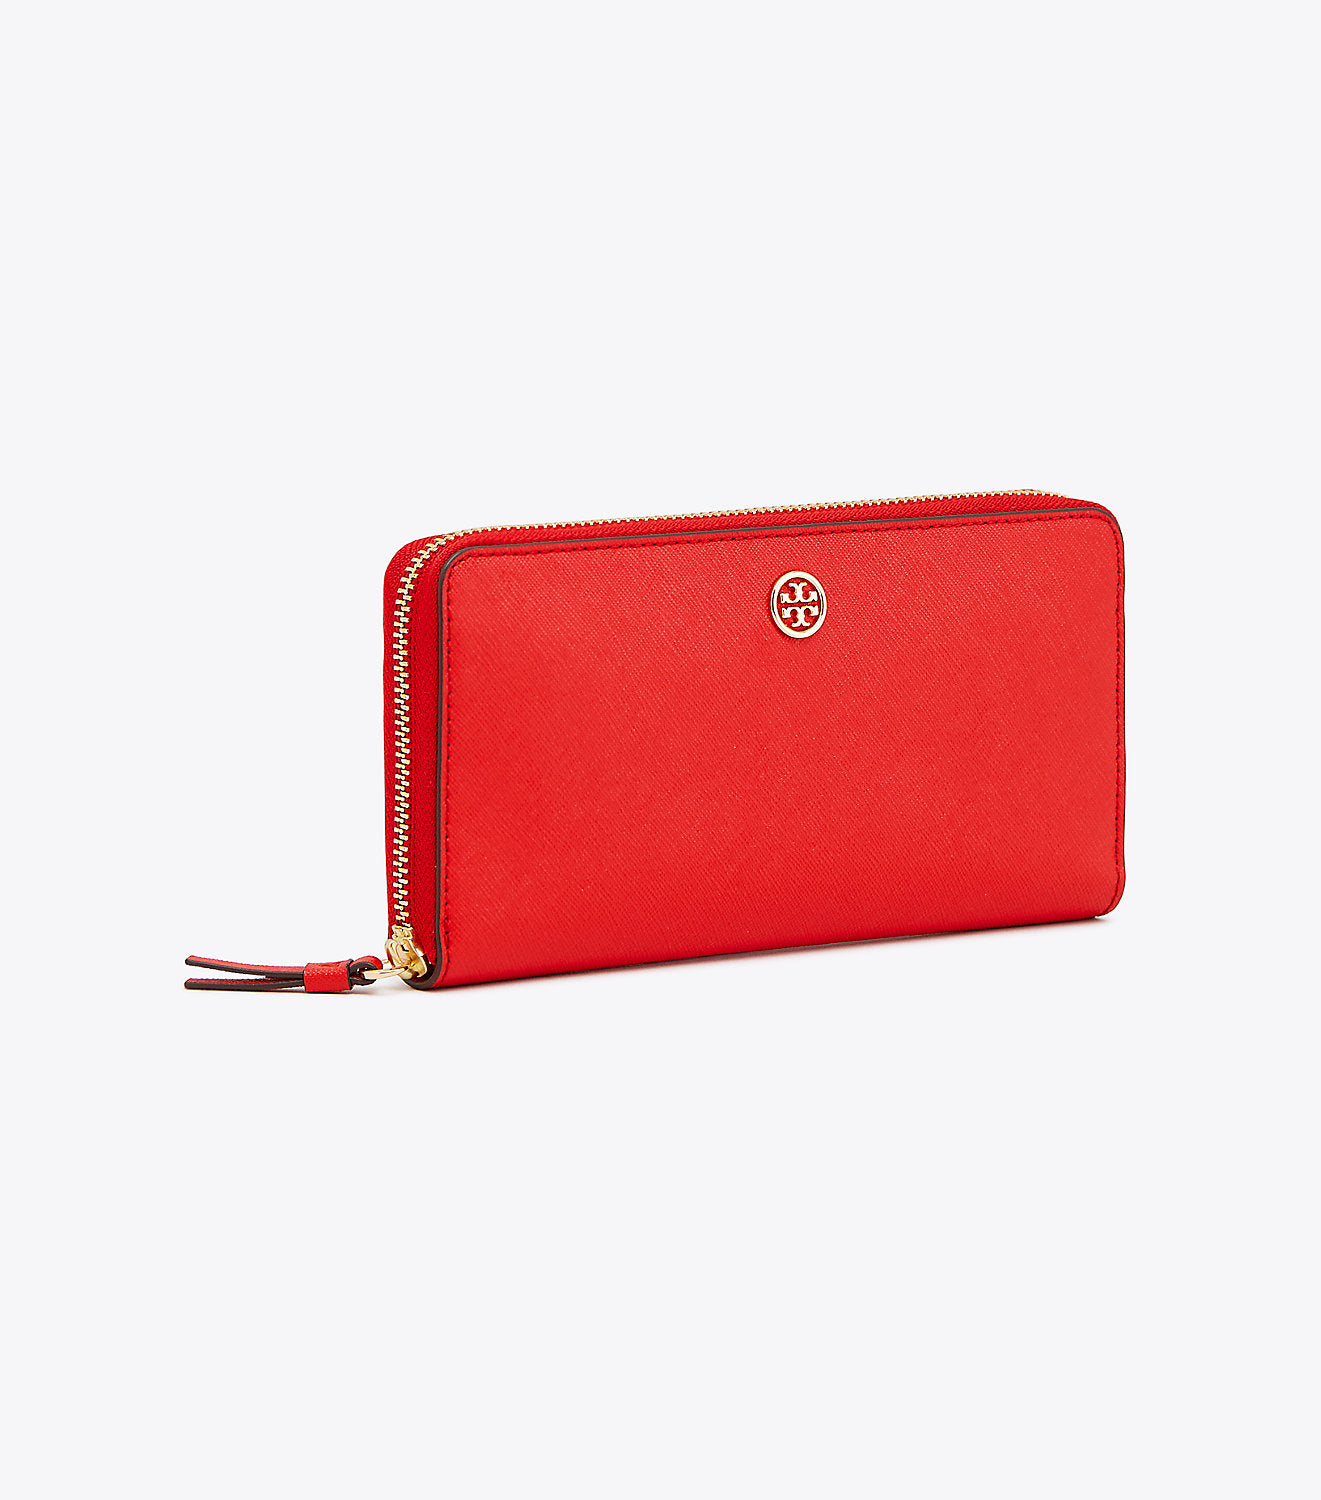 Tory Burch Robinson Zip Continental Wallet - Brilliant Red